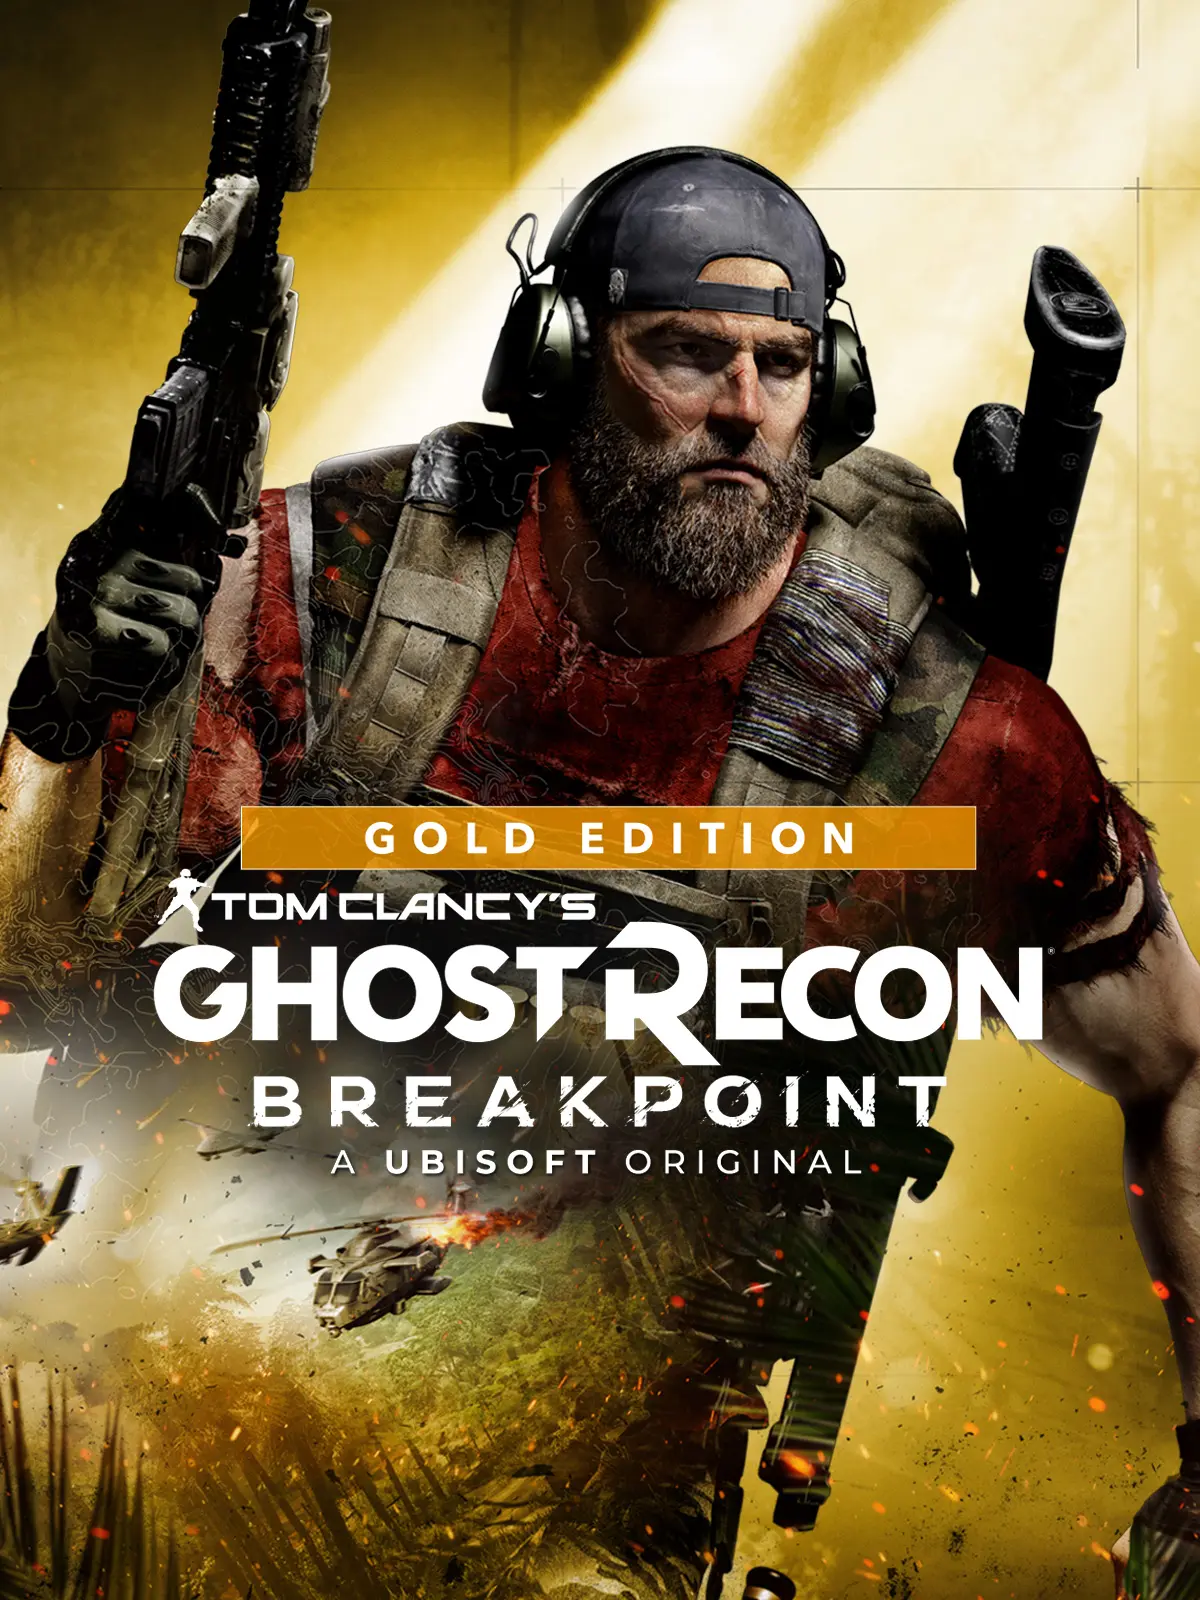 Tom Clancy's Ghost Recon Breakpoint Gold Edition (AR) (Xbox One / Xbox Series X|S) - Xbox Live - Digital Code